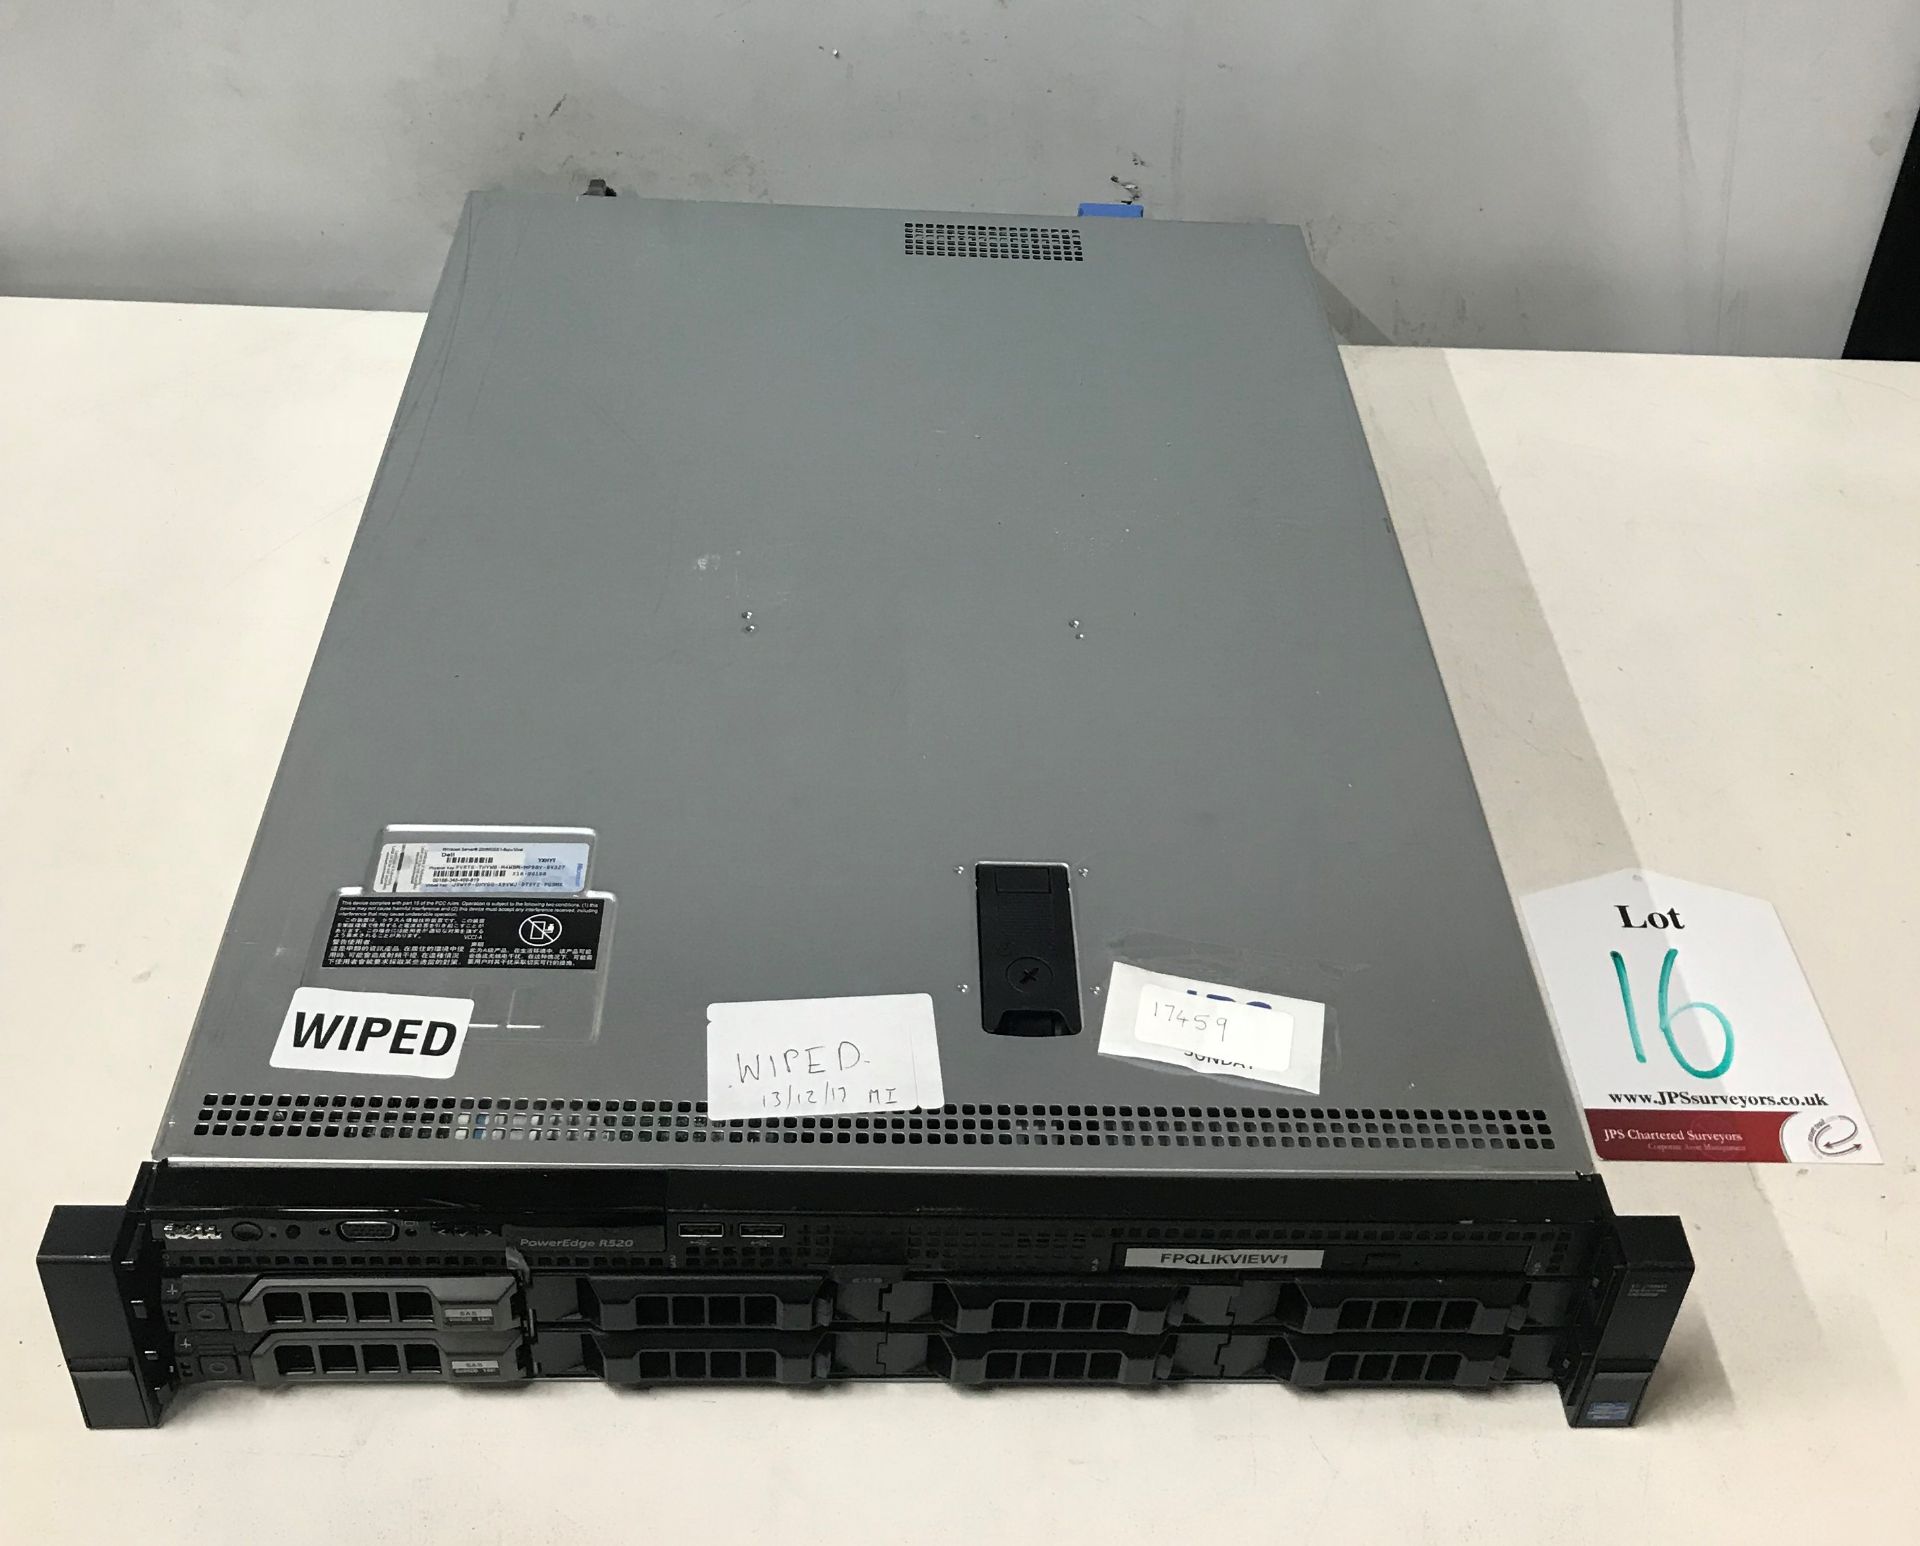 Dell PowerEdge Server Unit with 2 x 300GB HDD